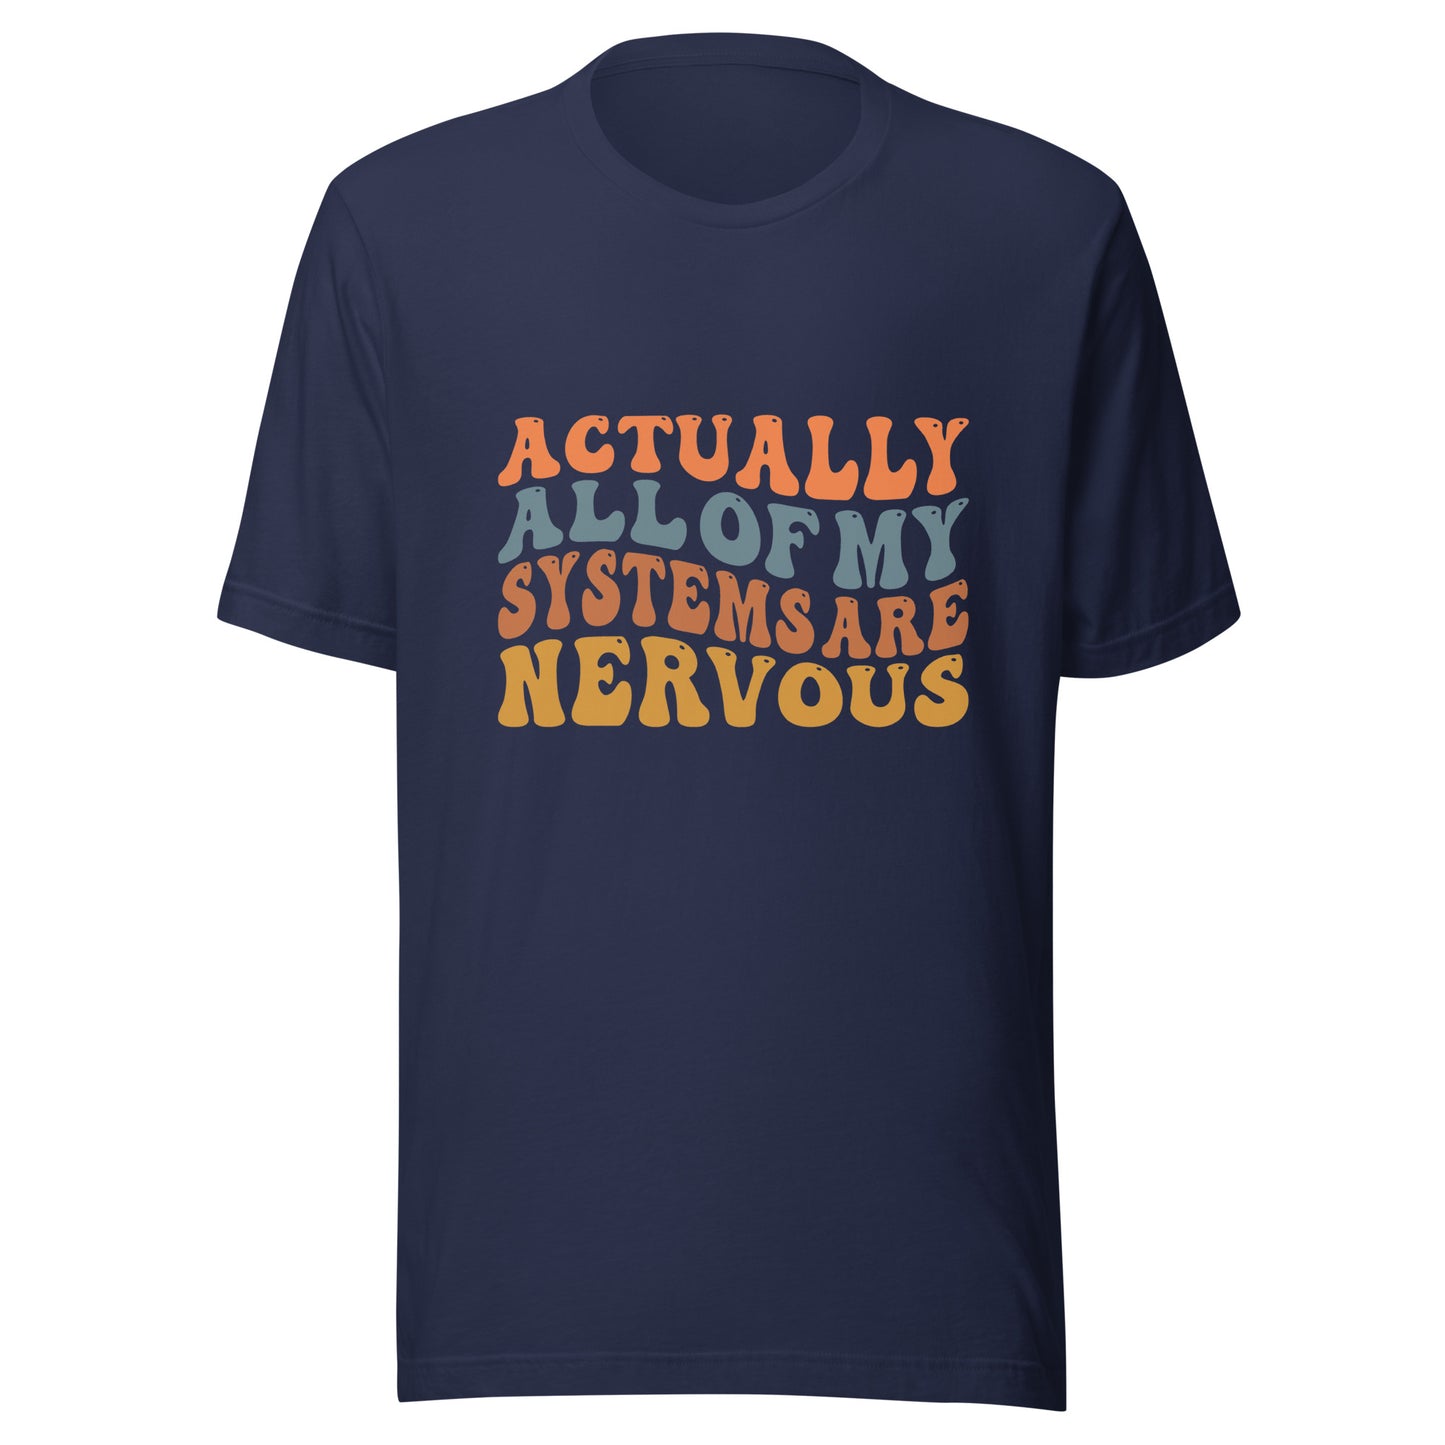 All of my systems are nervous t-shirt